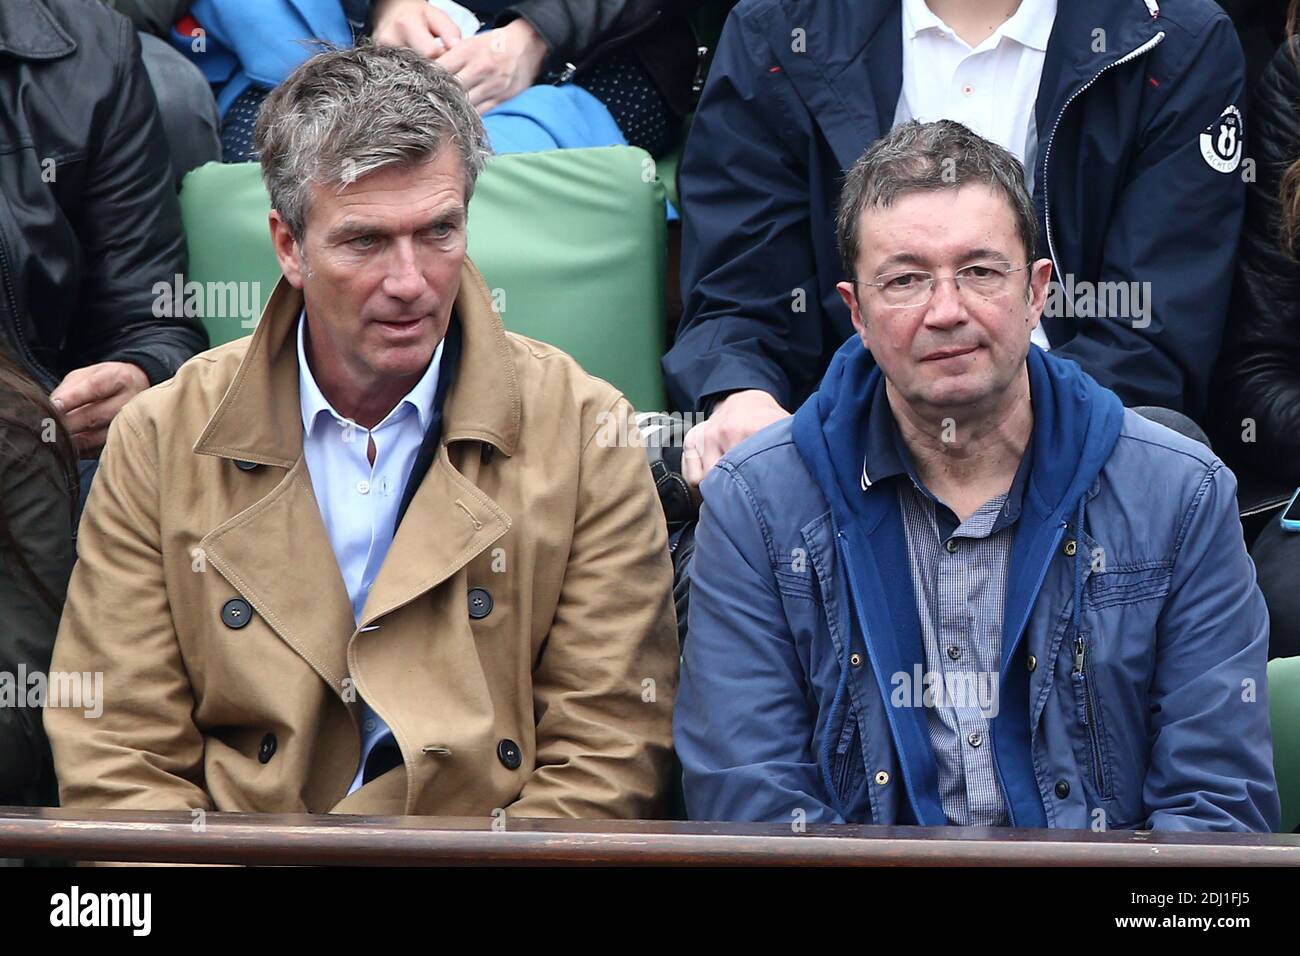 Philippe Caroit and Frederic Bouraly in the VIP Tribune during French Tennis Open at Roland-Garros arena in Paris, France on May 29, 2016. Photo by ABACAPRESS.COM Stock Photo